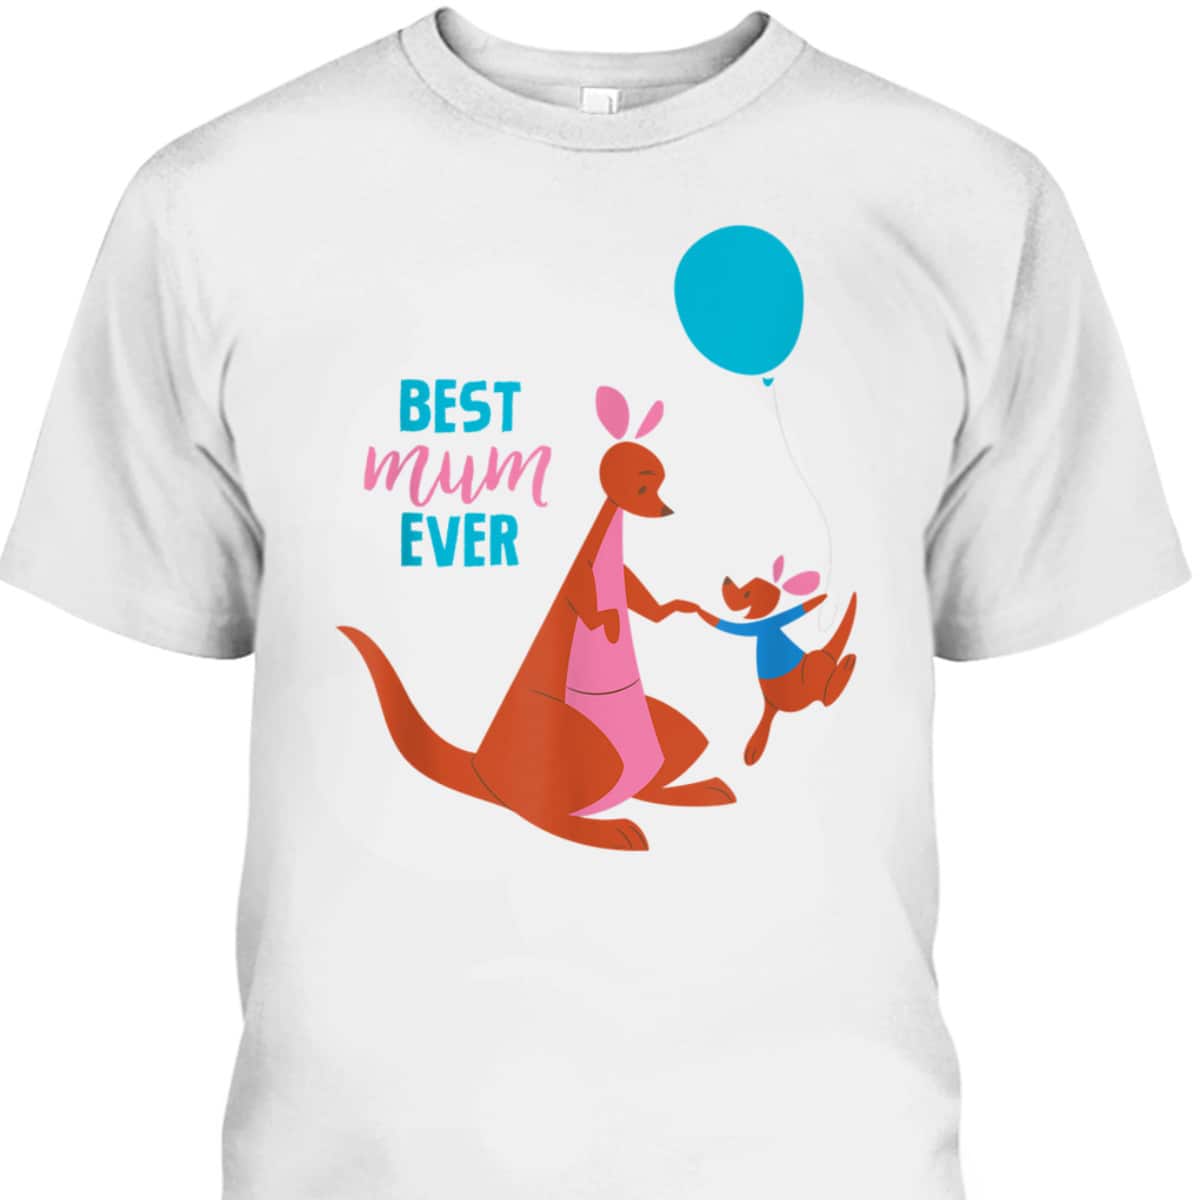 Mother's Day T-Shirt Kanga And Roo Best Mum Ever Disney Gift For Mom